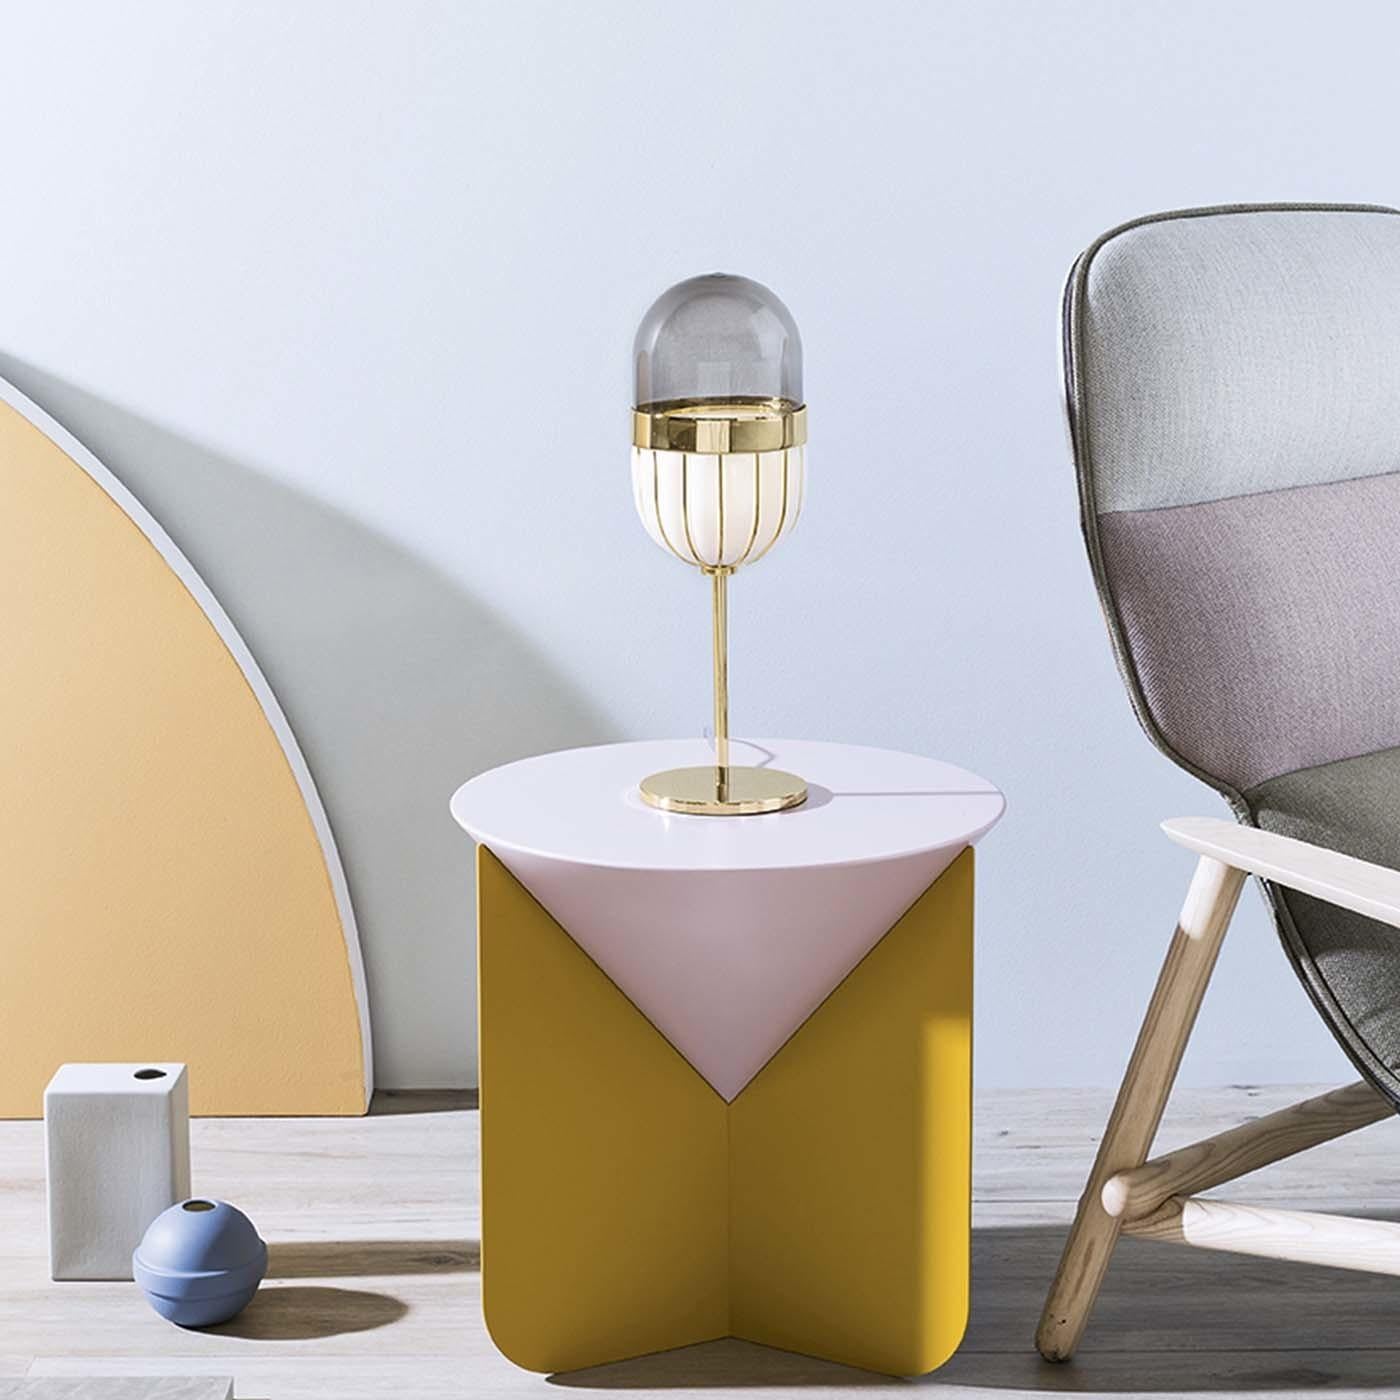 Part of the Pill collection designed by Matteo Zorzenoni, this elegant and modern table lamp will be a sophisticated addition to a desk or console and can be paired with the floor lamp and ceiling lamp in the same series for a cohesive effect. The